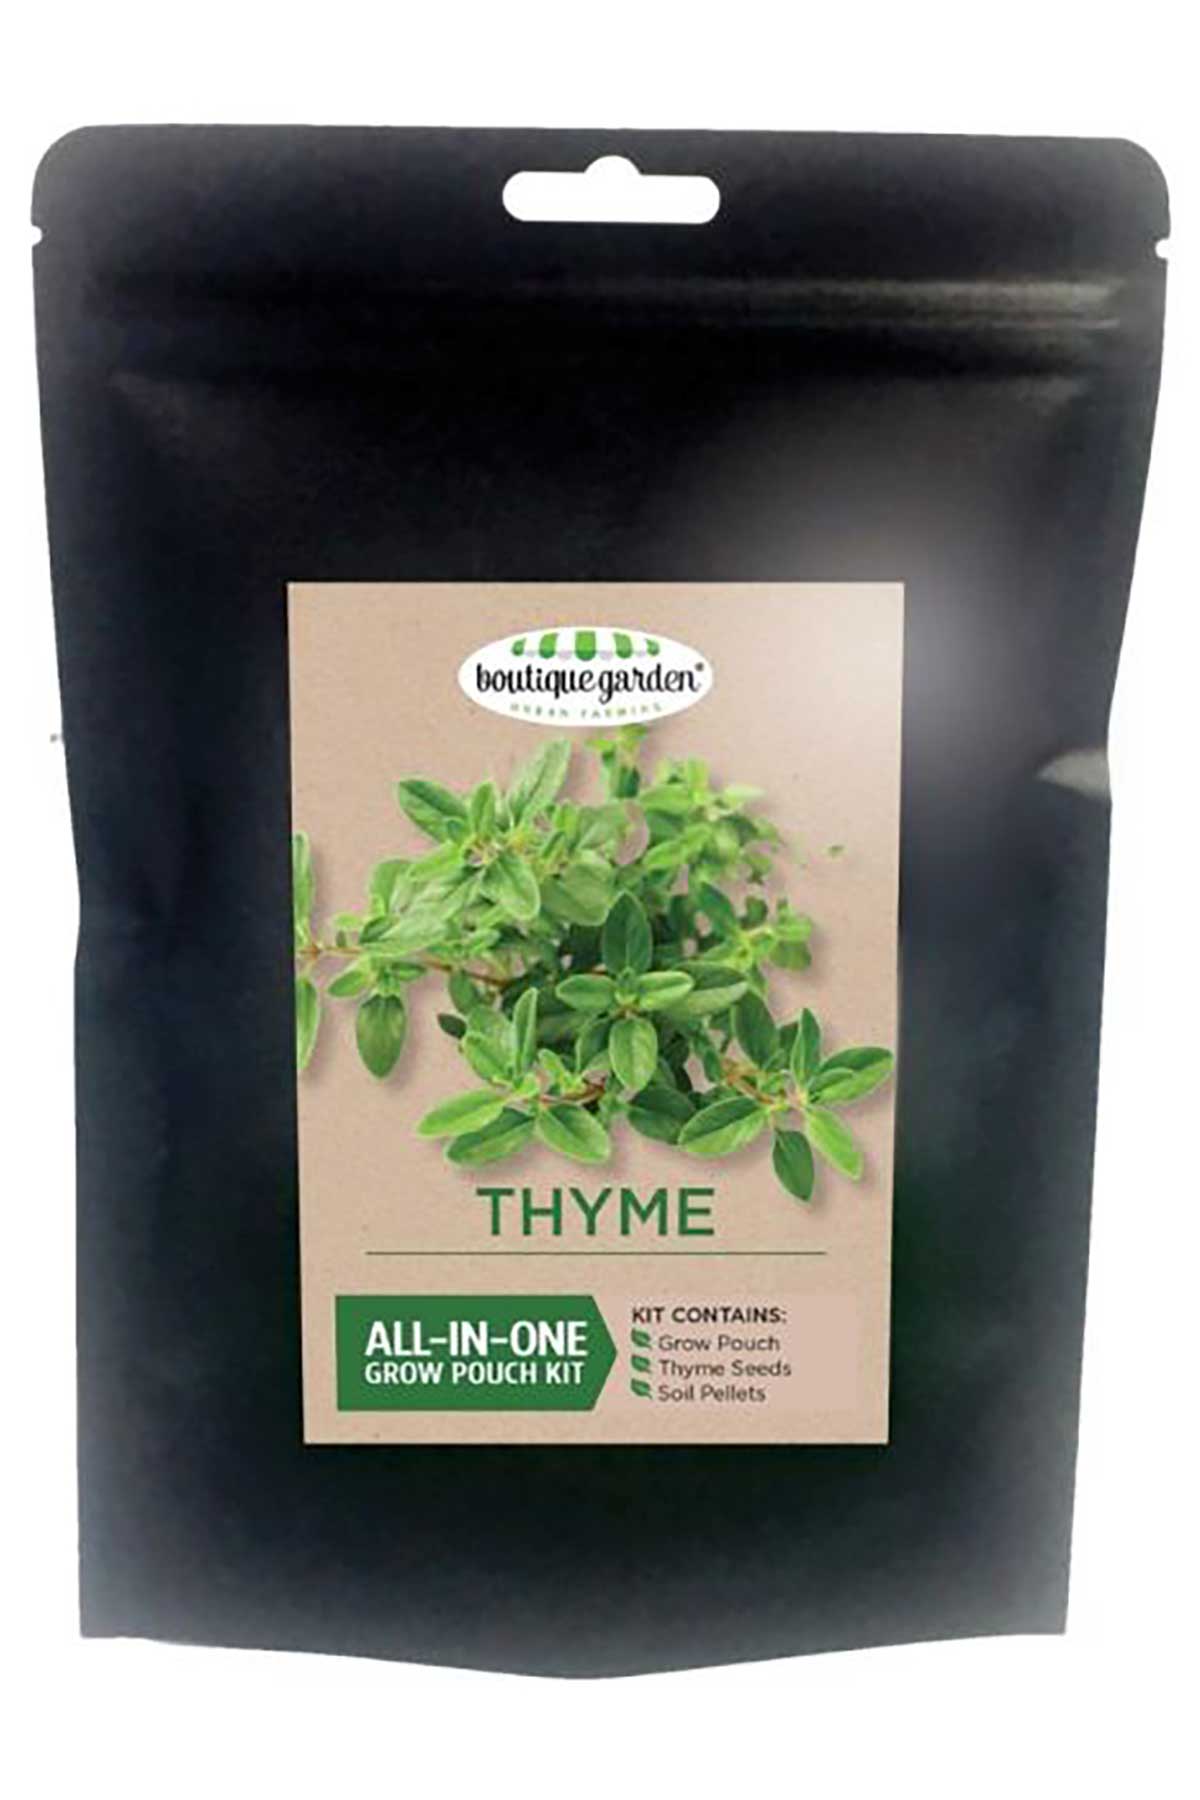 Mr Fothergills thyme all in one kit